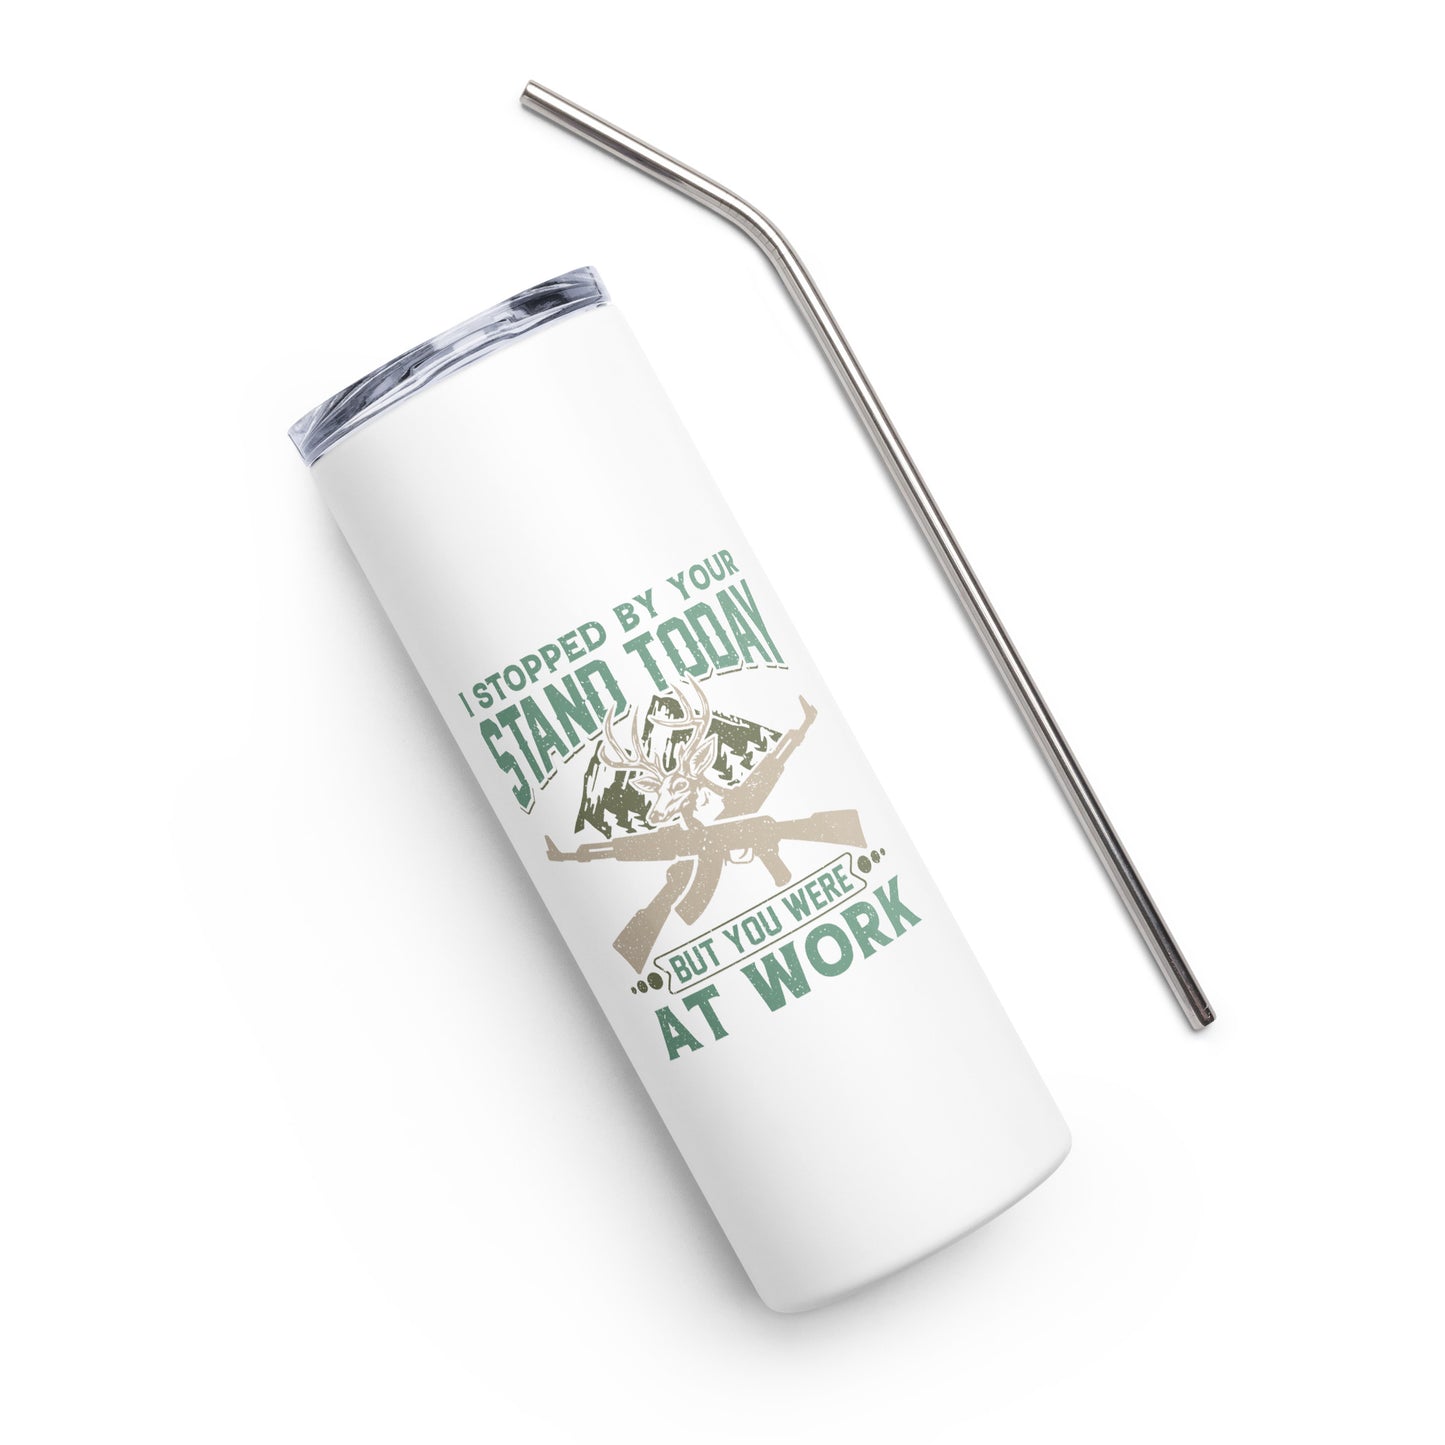 I Stopped by Your Stand Today Stainless steel tumbler